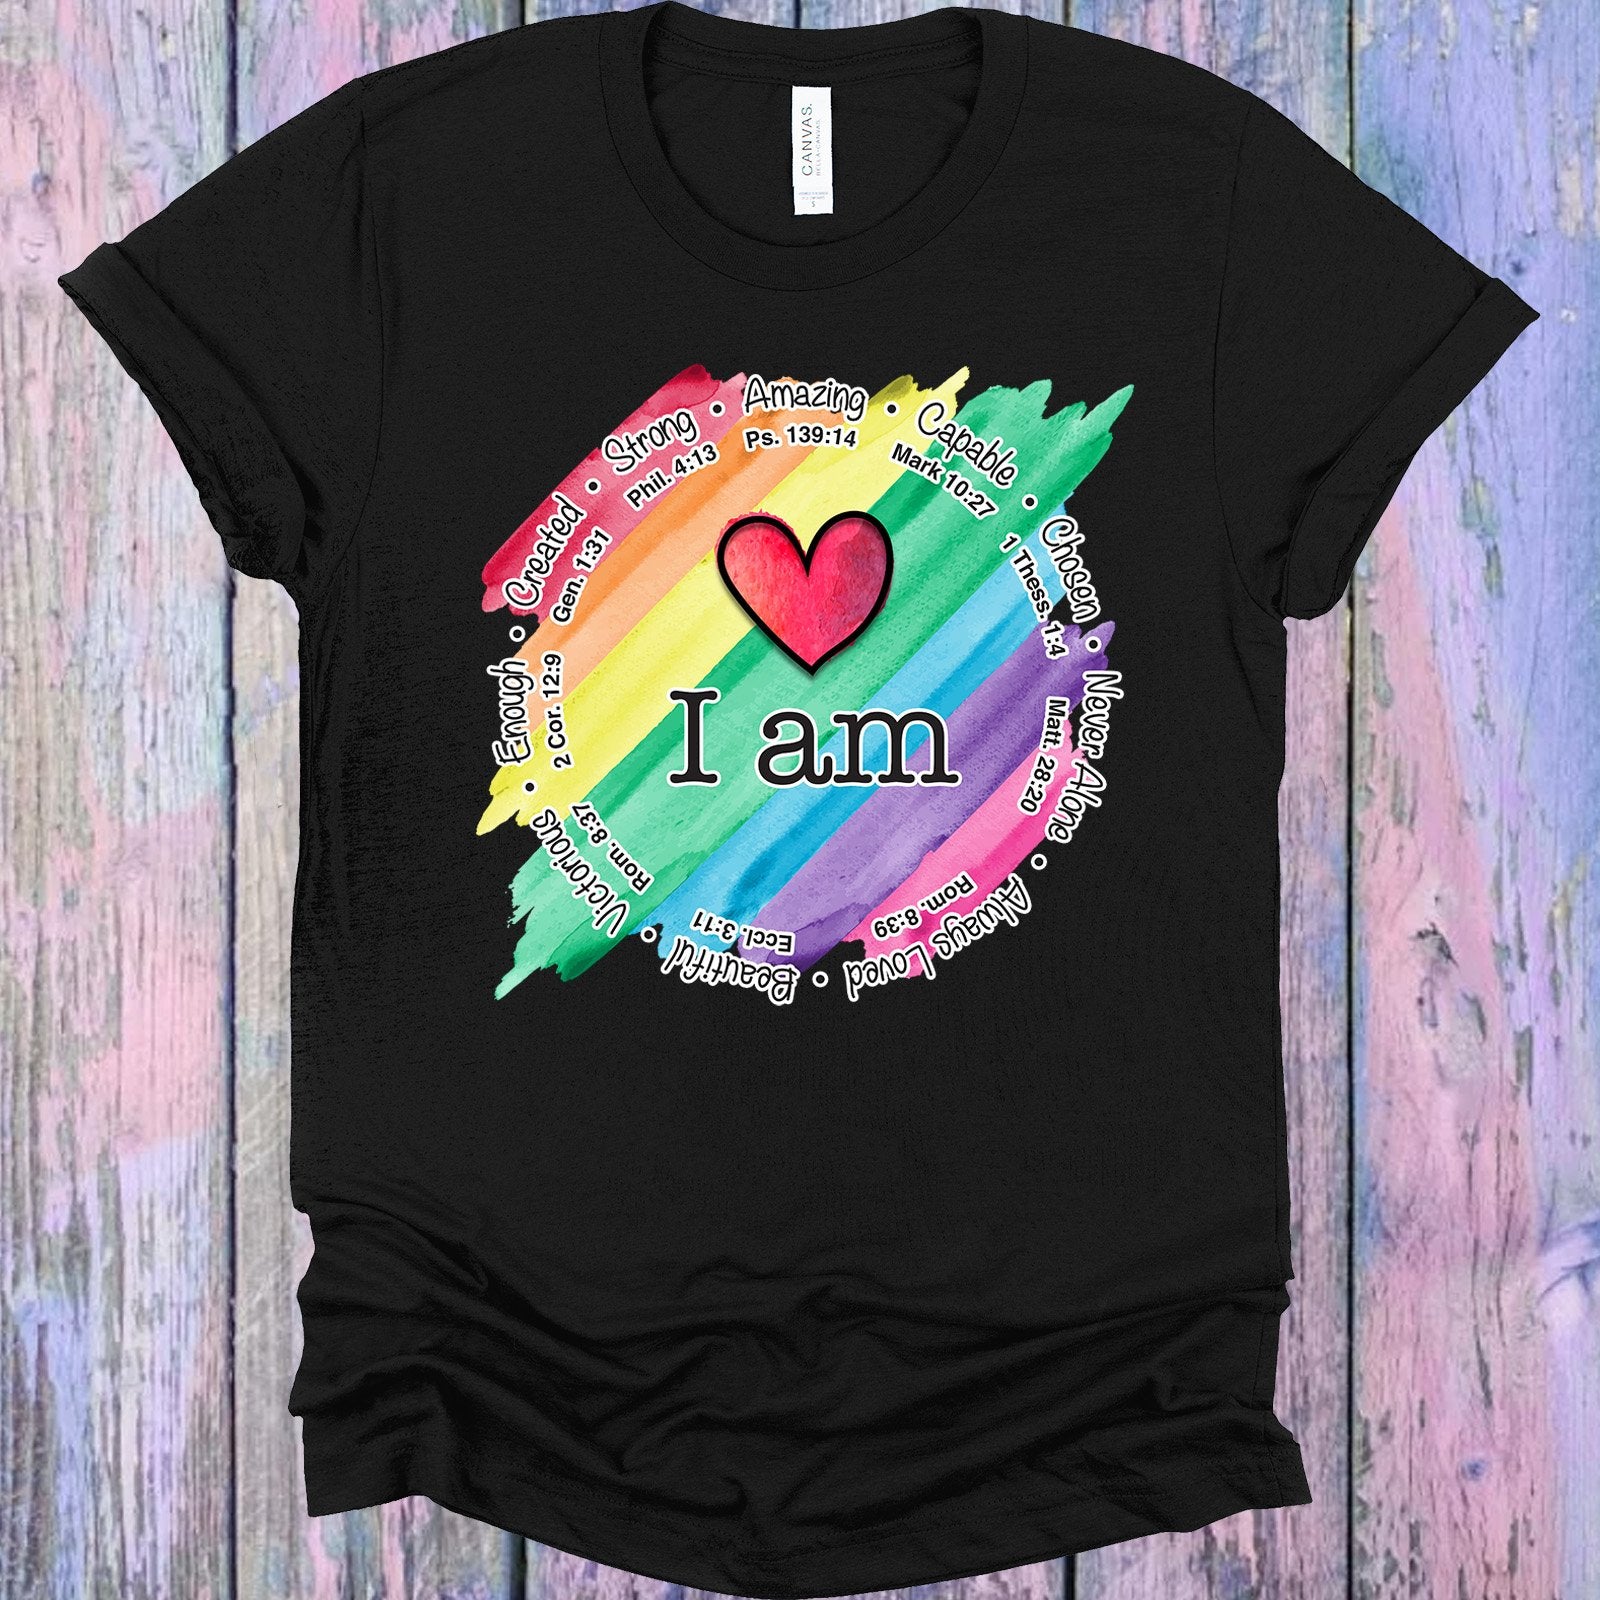 I Am Graphic Tee Graphic Tee